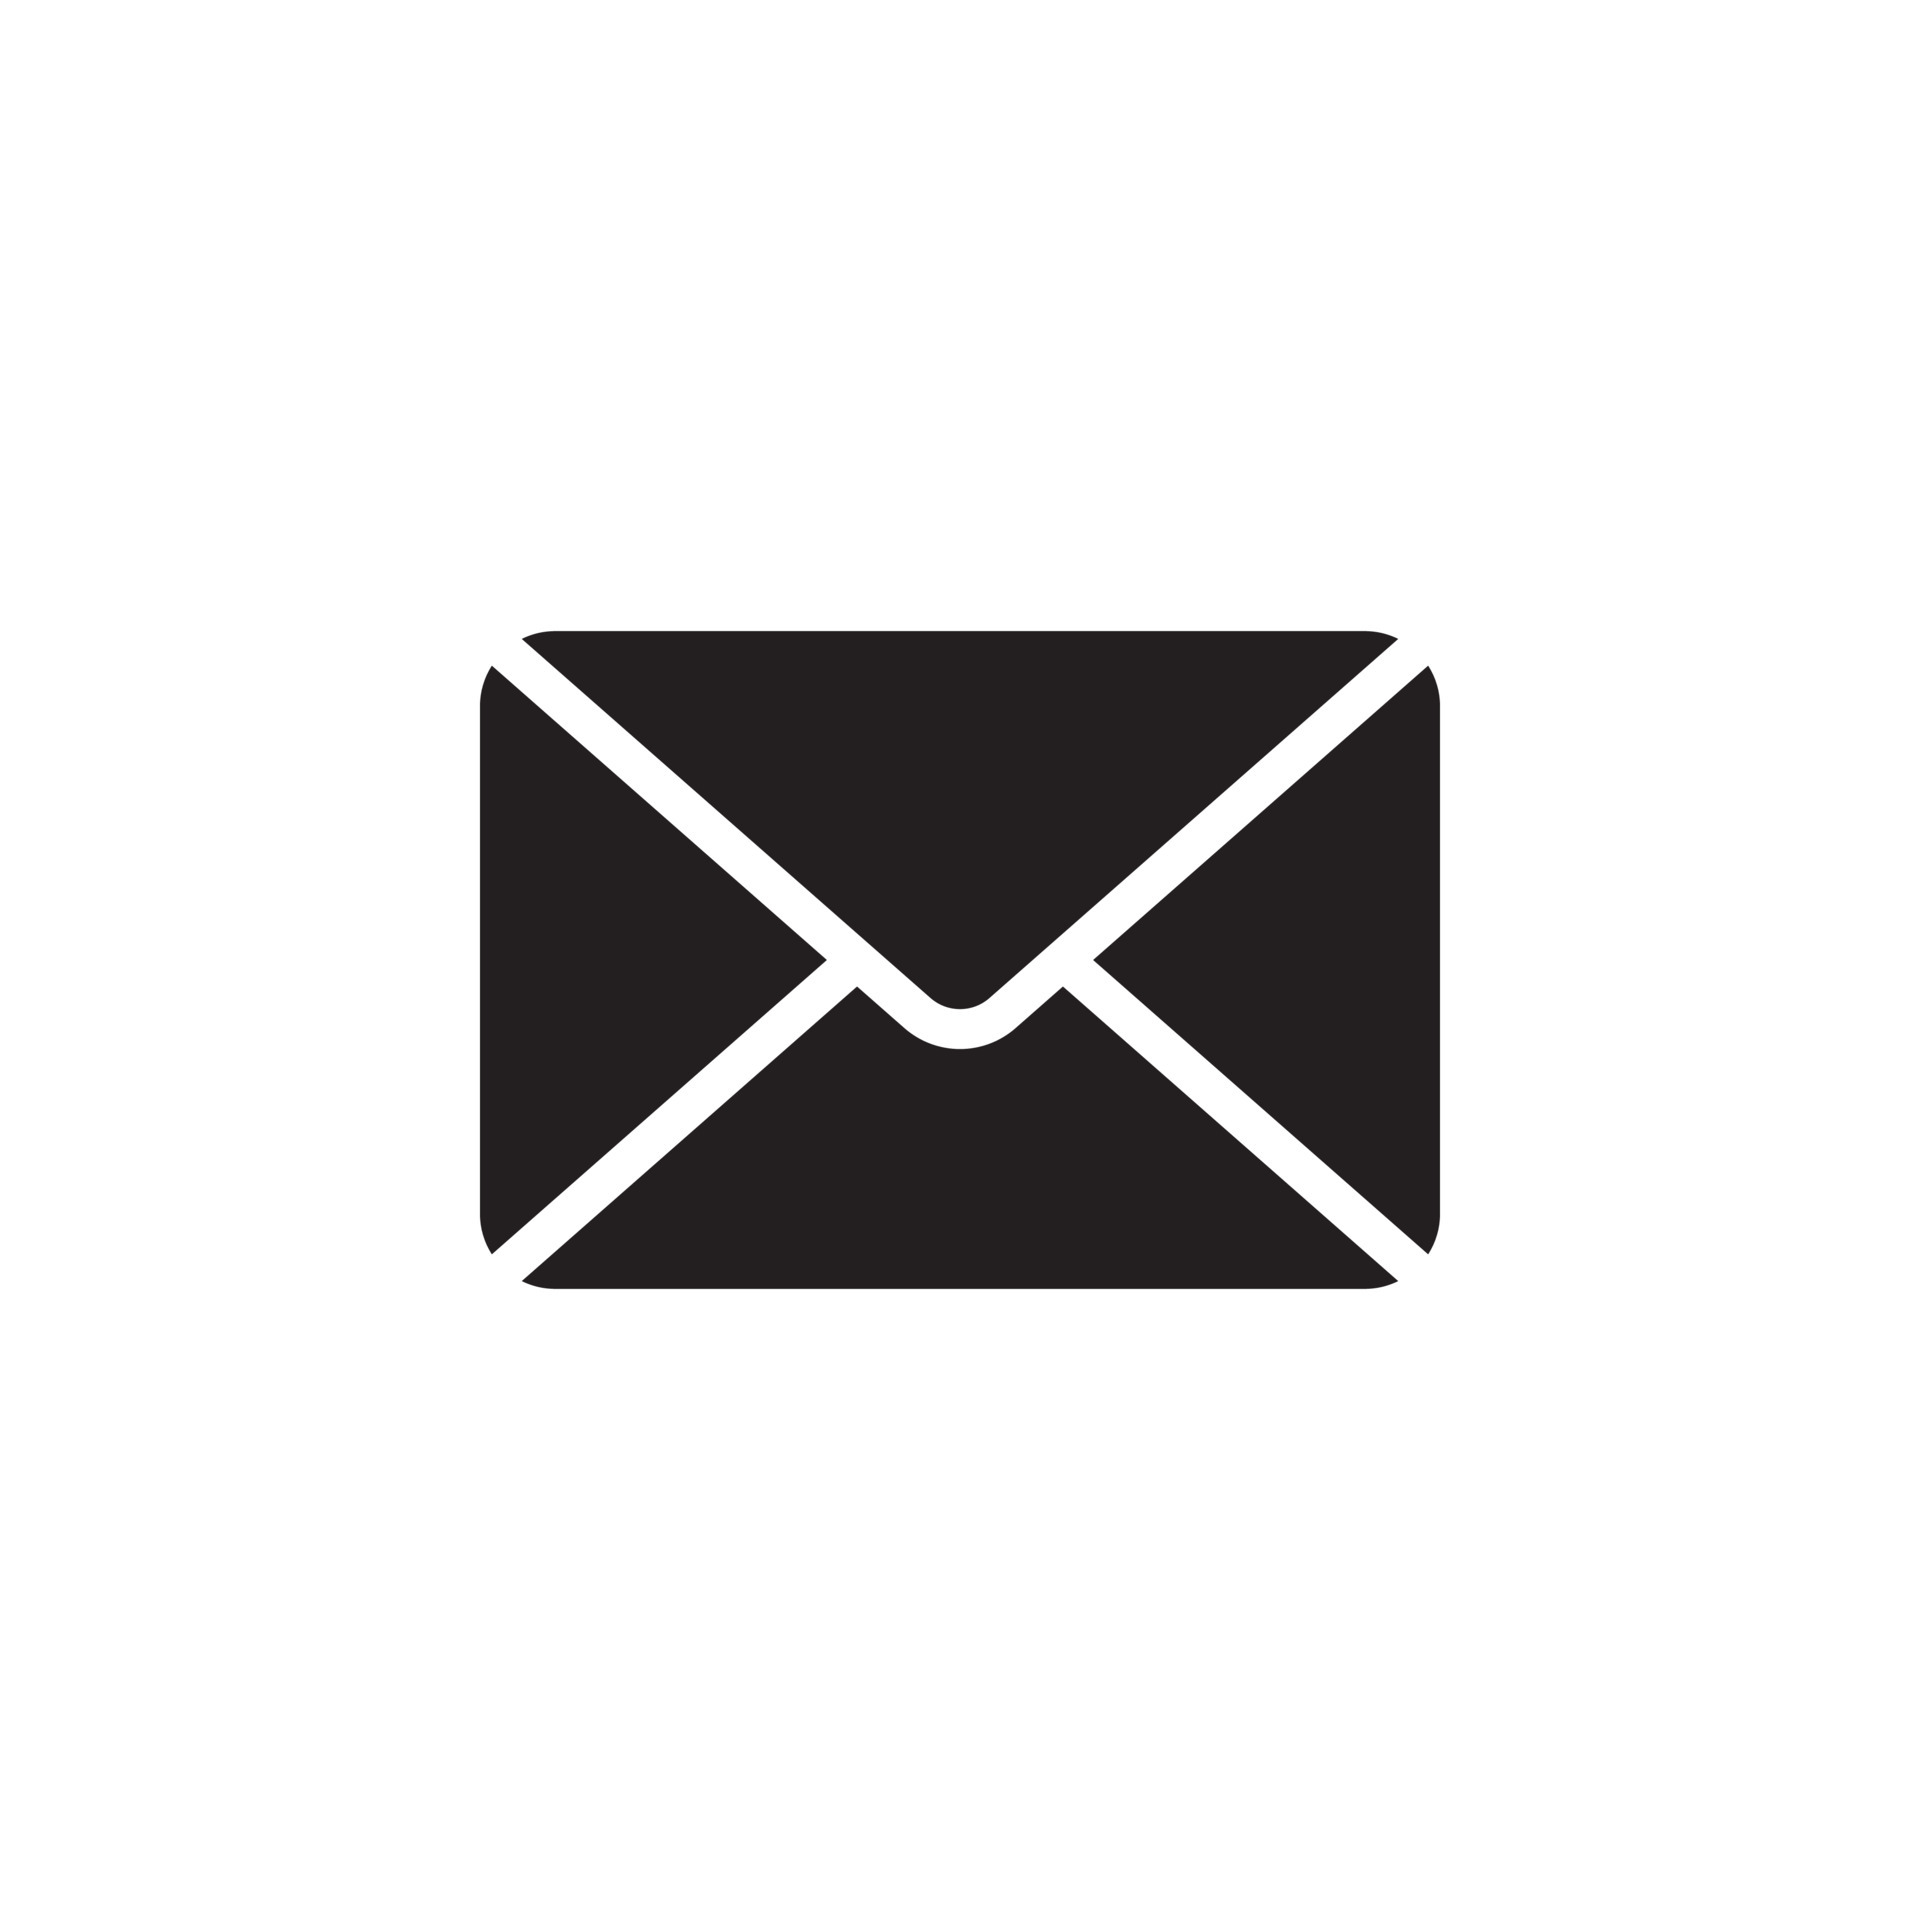 email icon sign symbol logo vector